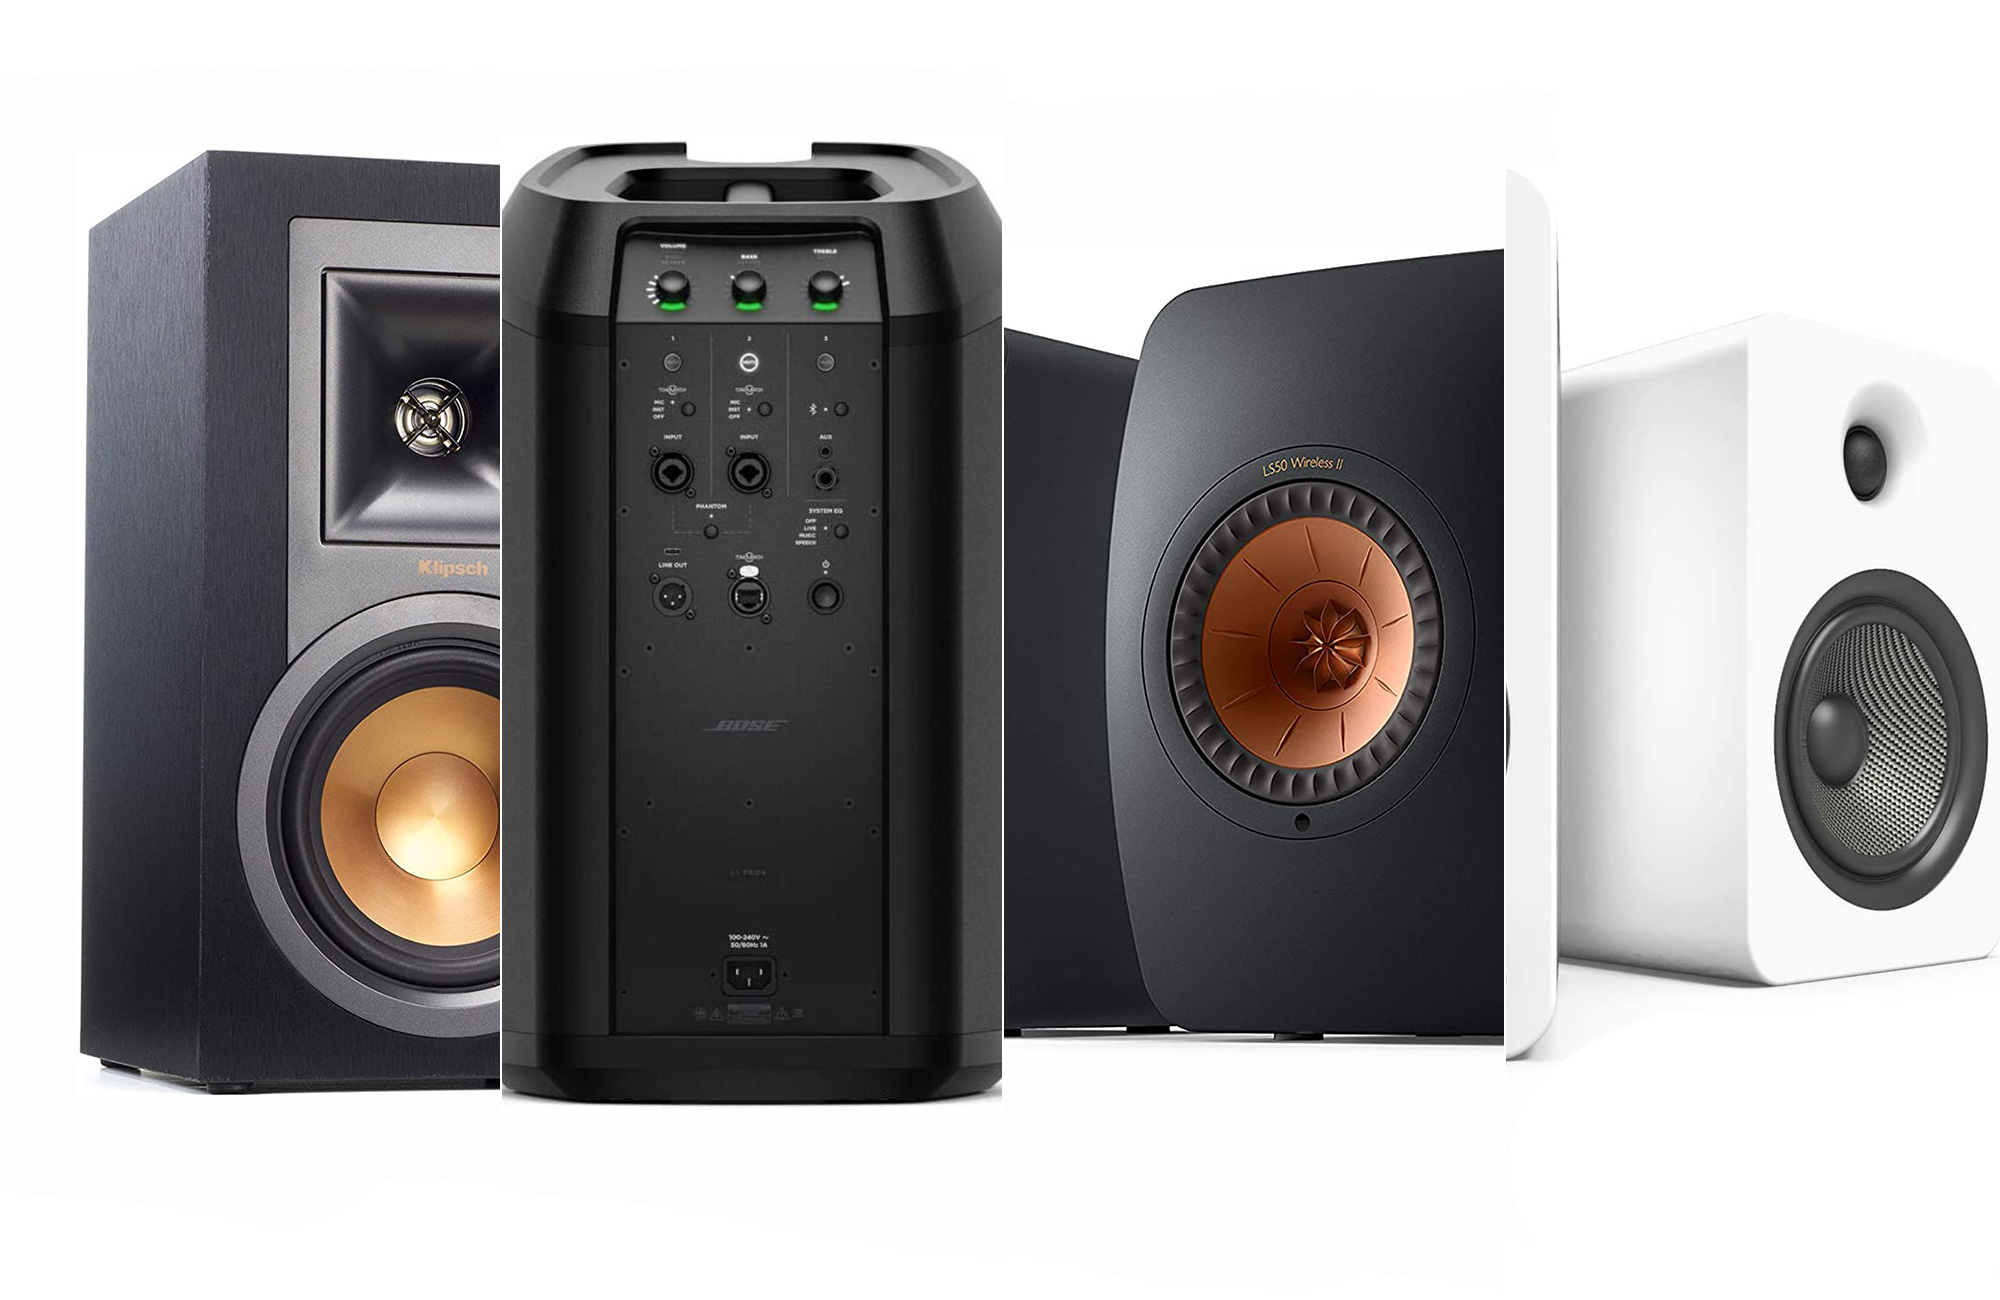 Little bit disappointed after upgrading Base audio -> High performance &  premium speakers